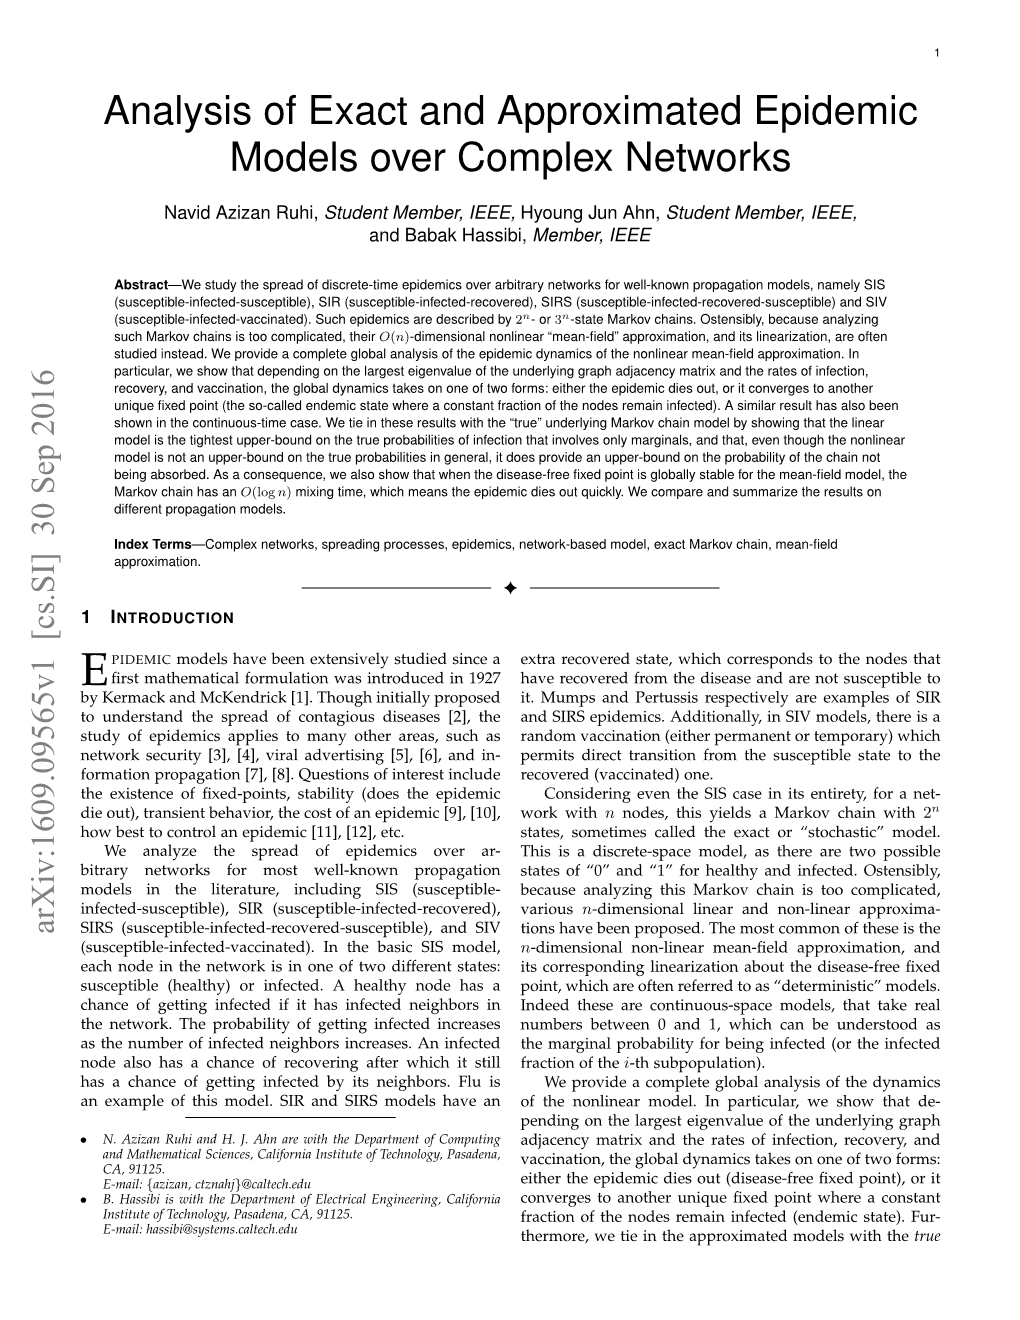 Analysis of Exact and Approximated Epidemic Models Over Complex Networks